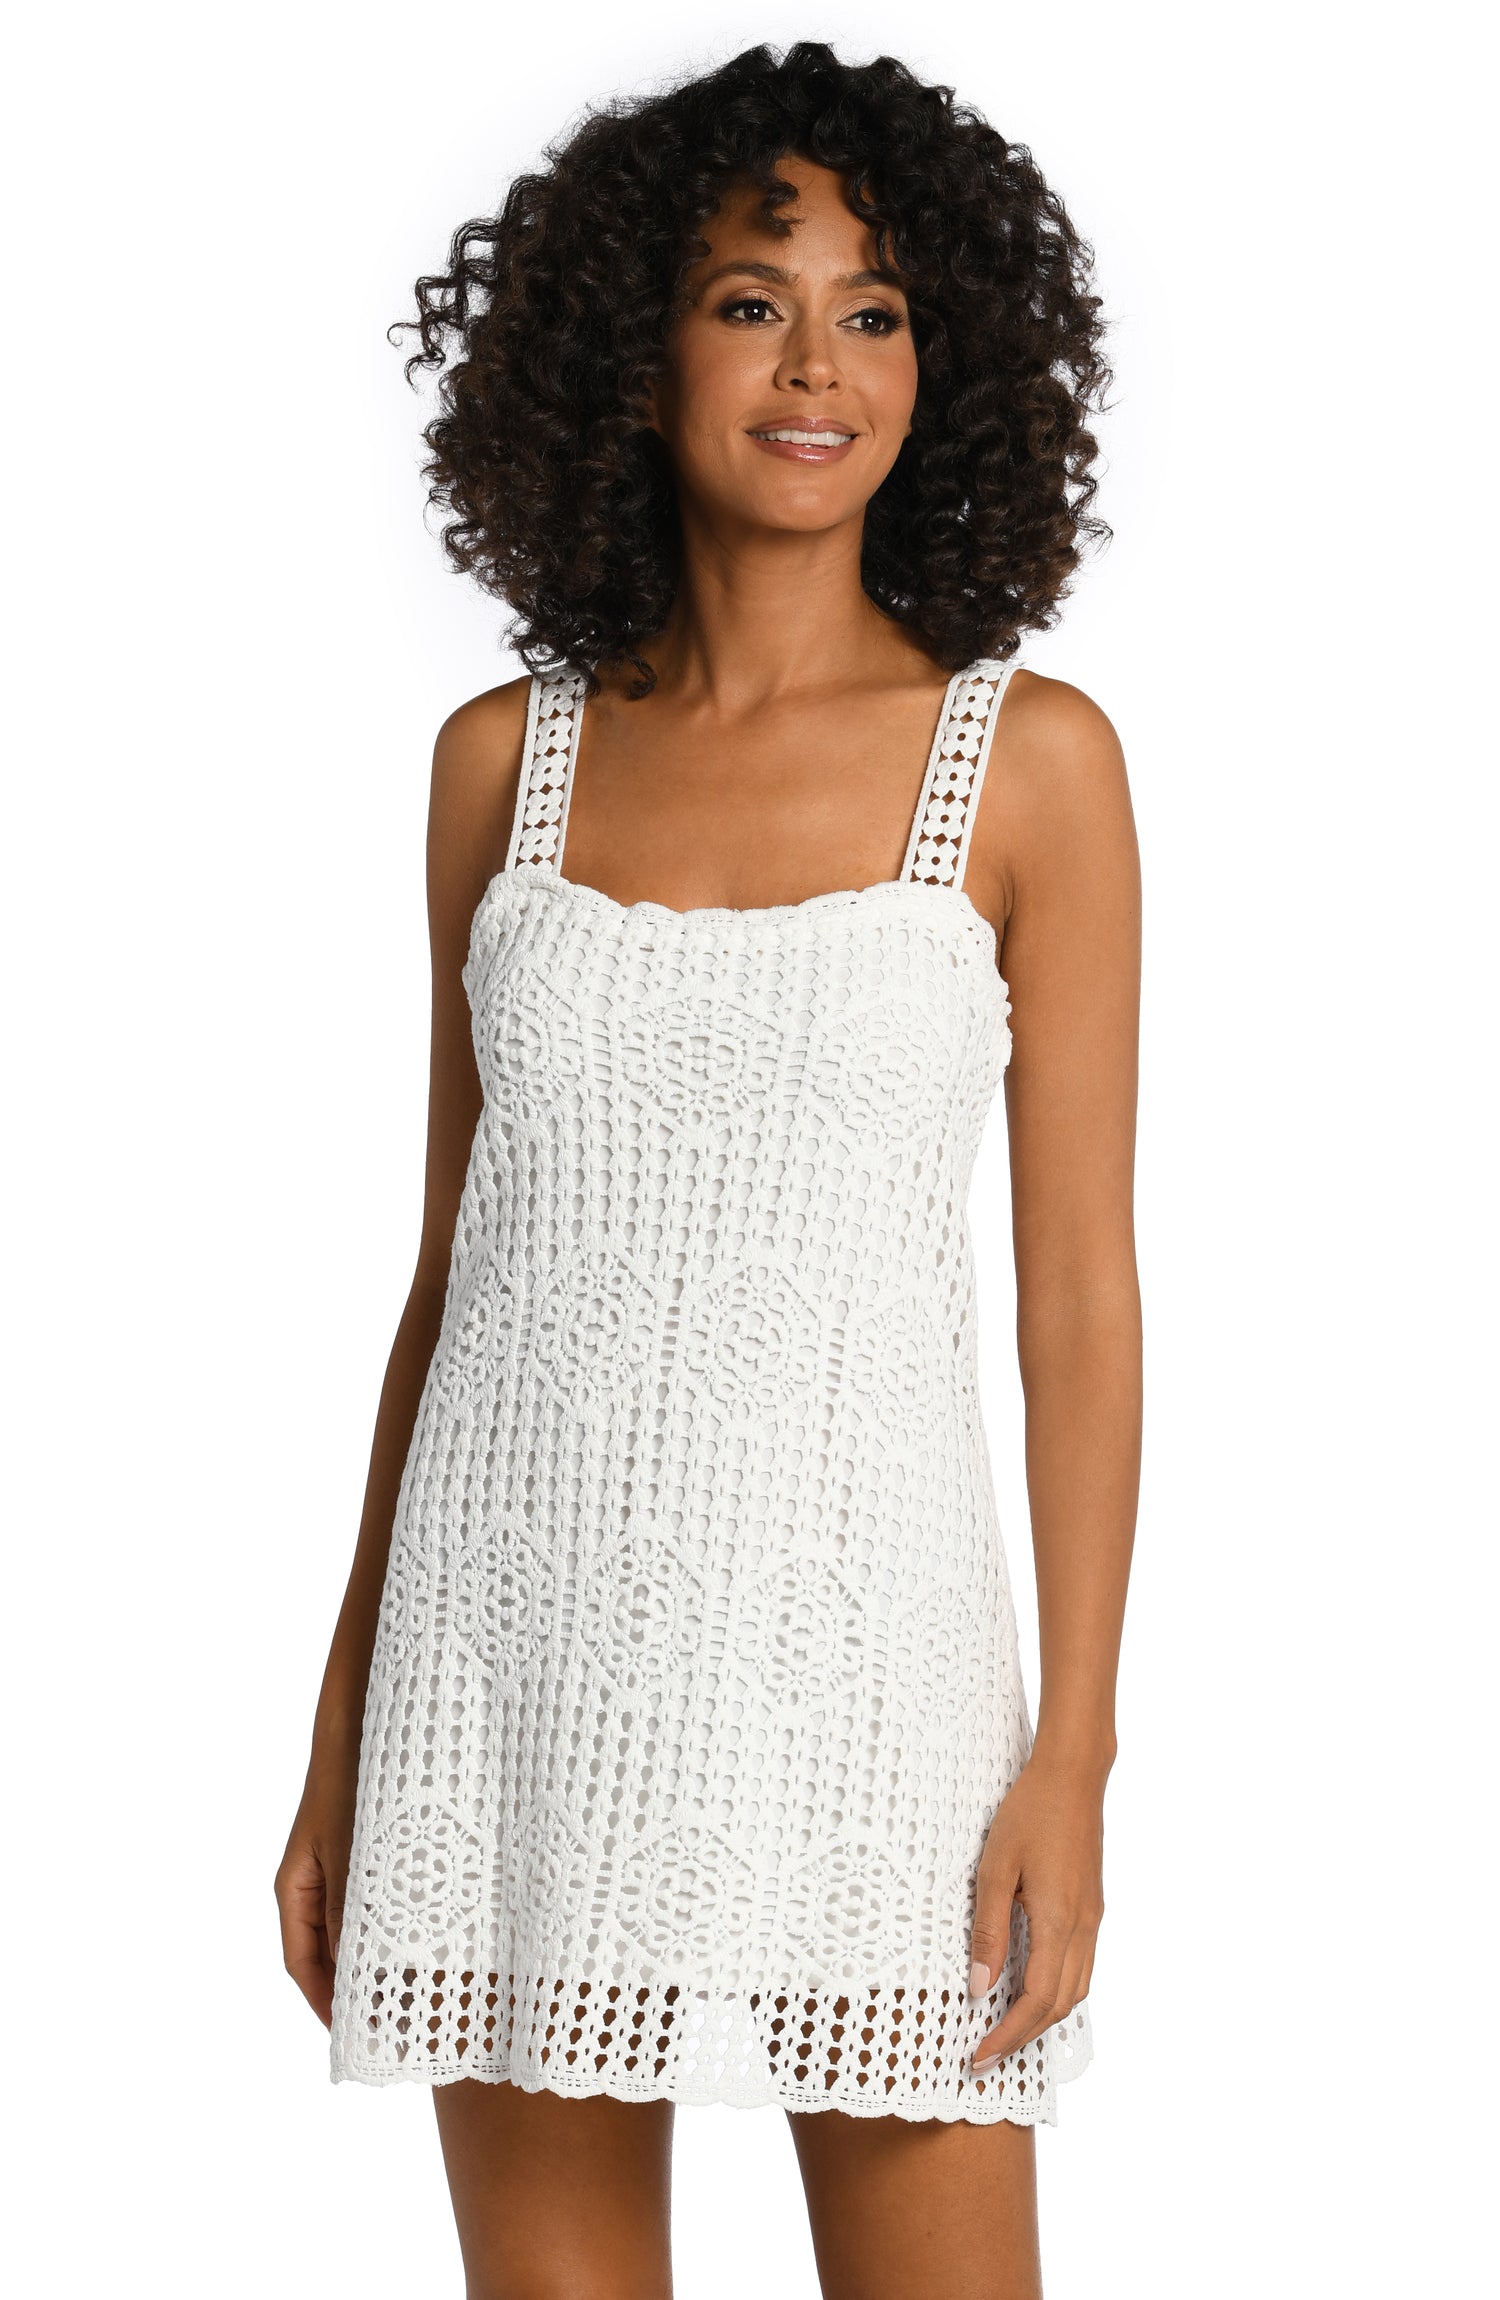 Model is wearing an ivory colored crochet tank dress cover up from our Waverly Covers collection!